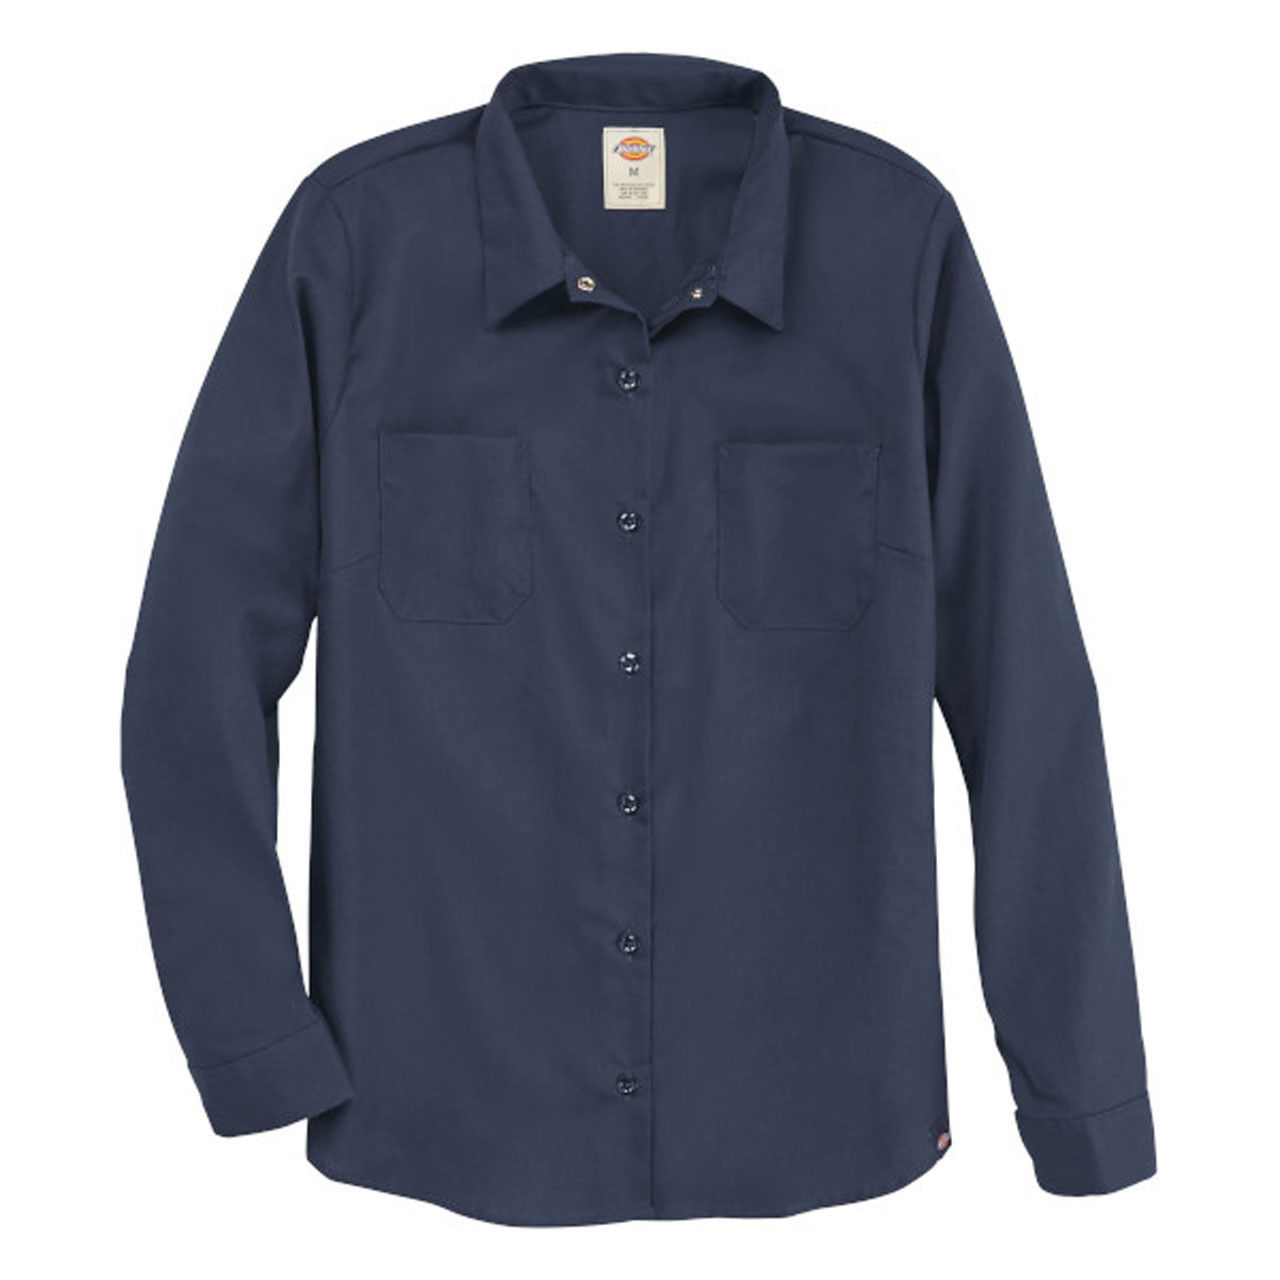 How is the collar on dickie long sleeve work shirts designed?